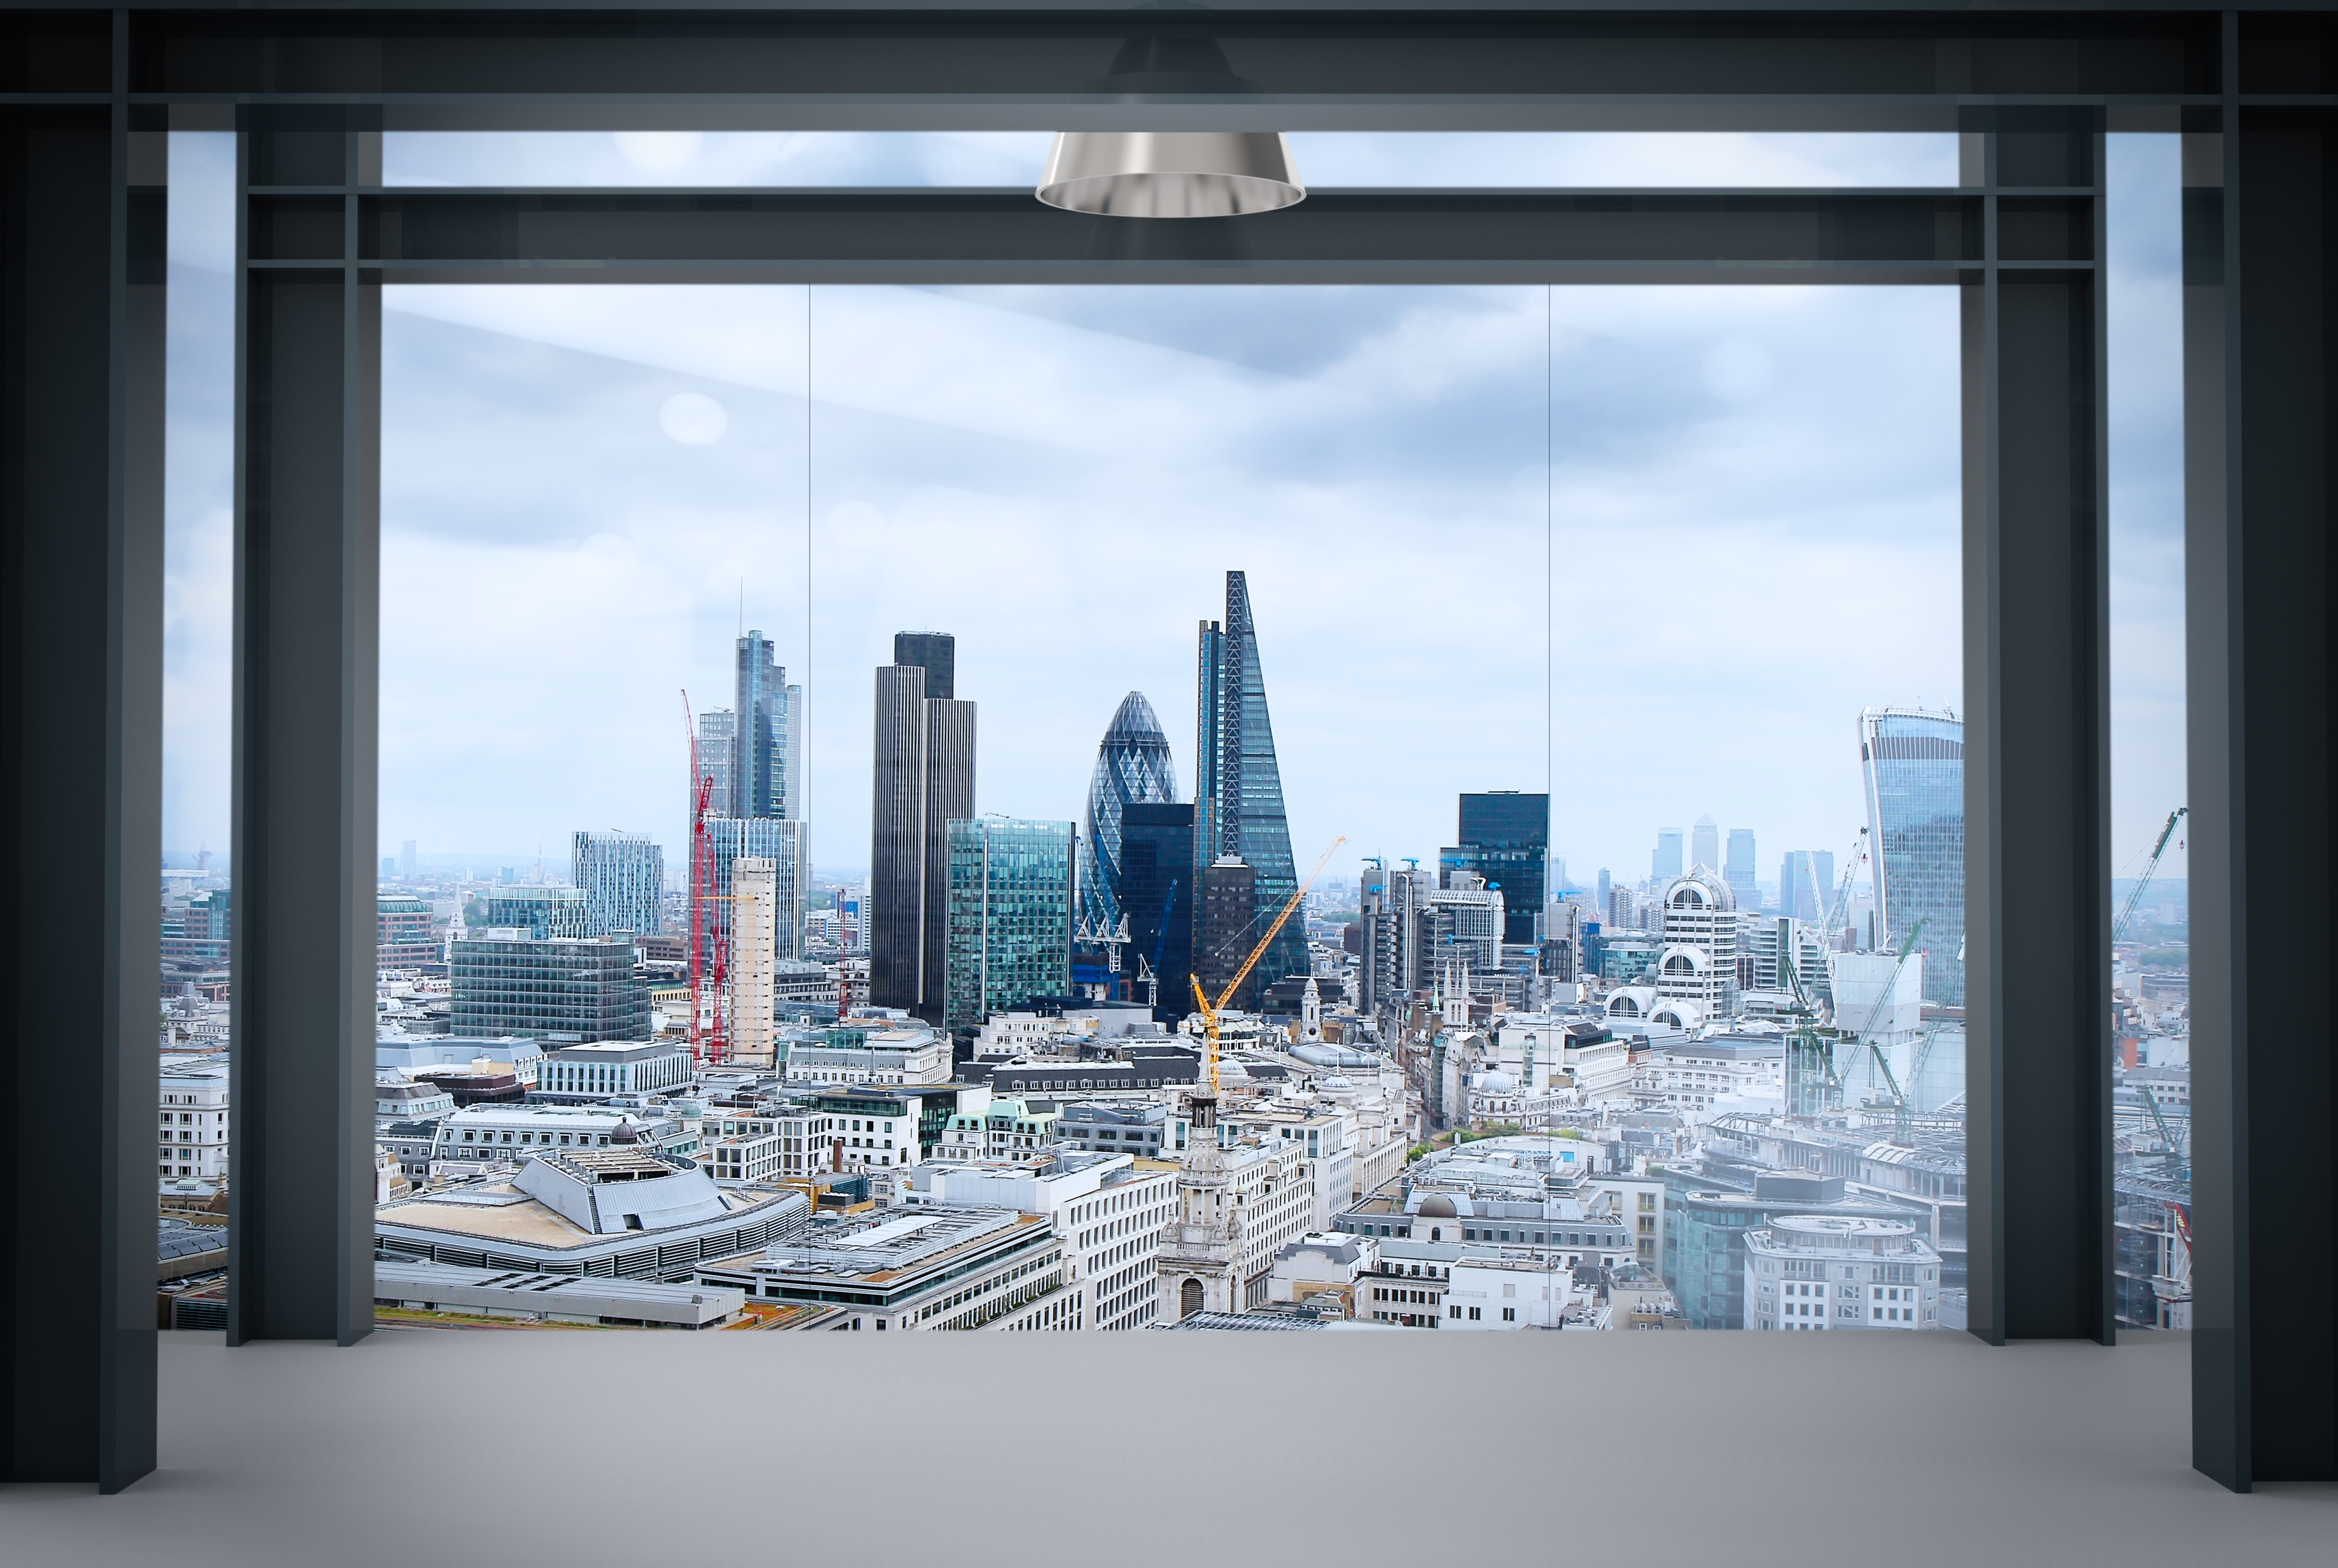 interior space of modern empty office interior with london city background